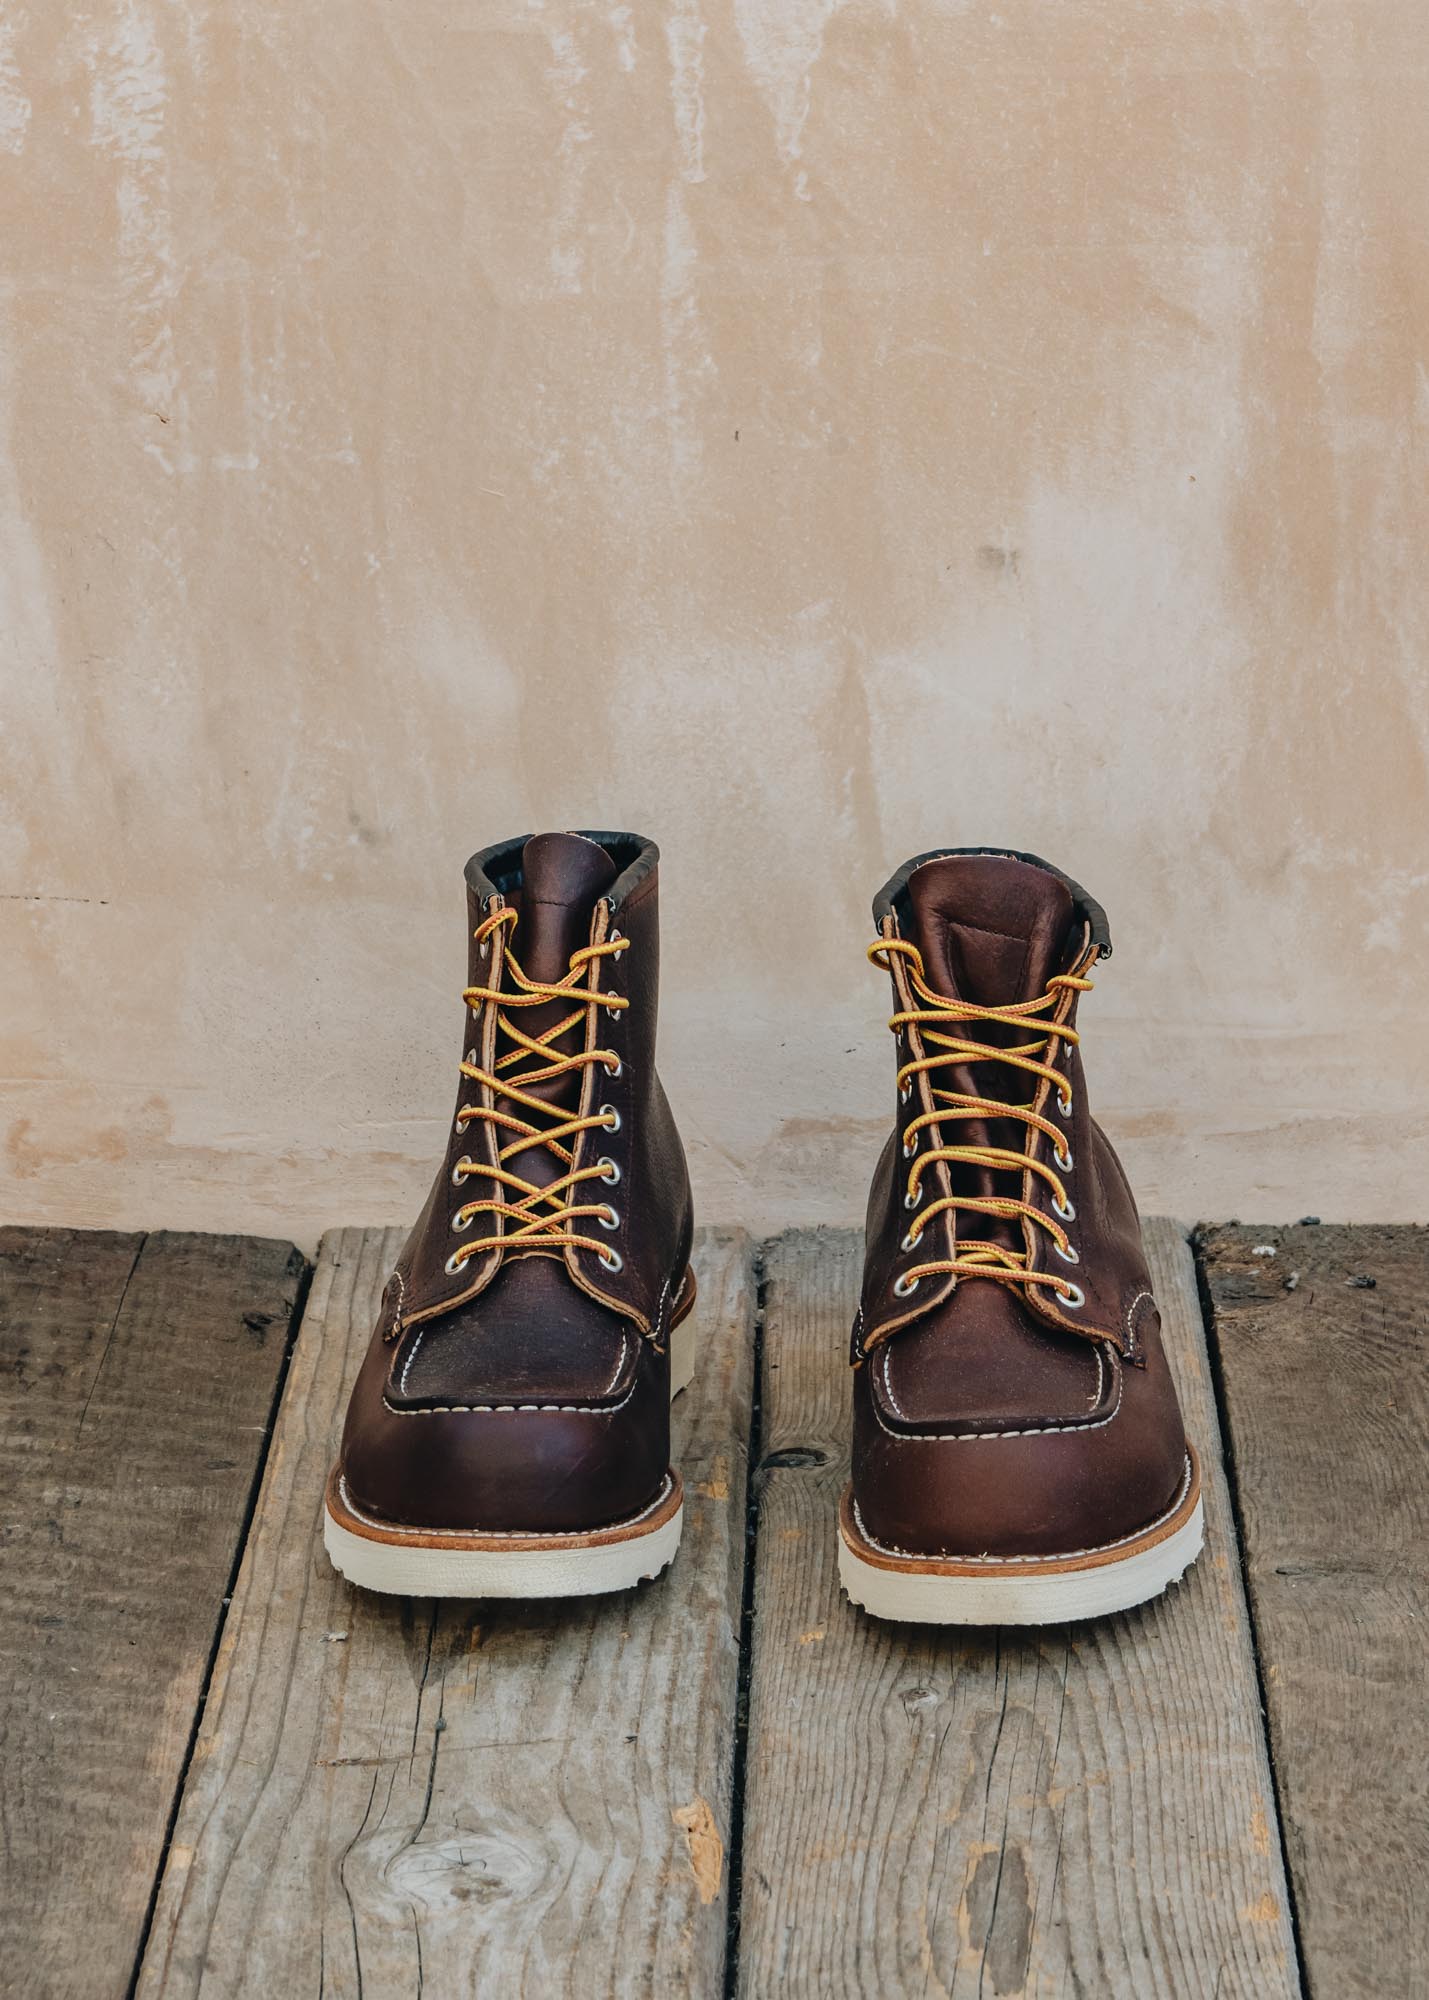 Red Wing Classic Moc Toe Boots in Briar Oil Slick